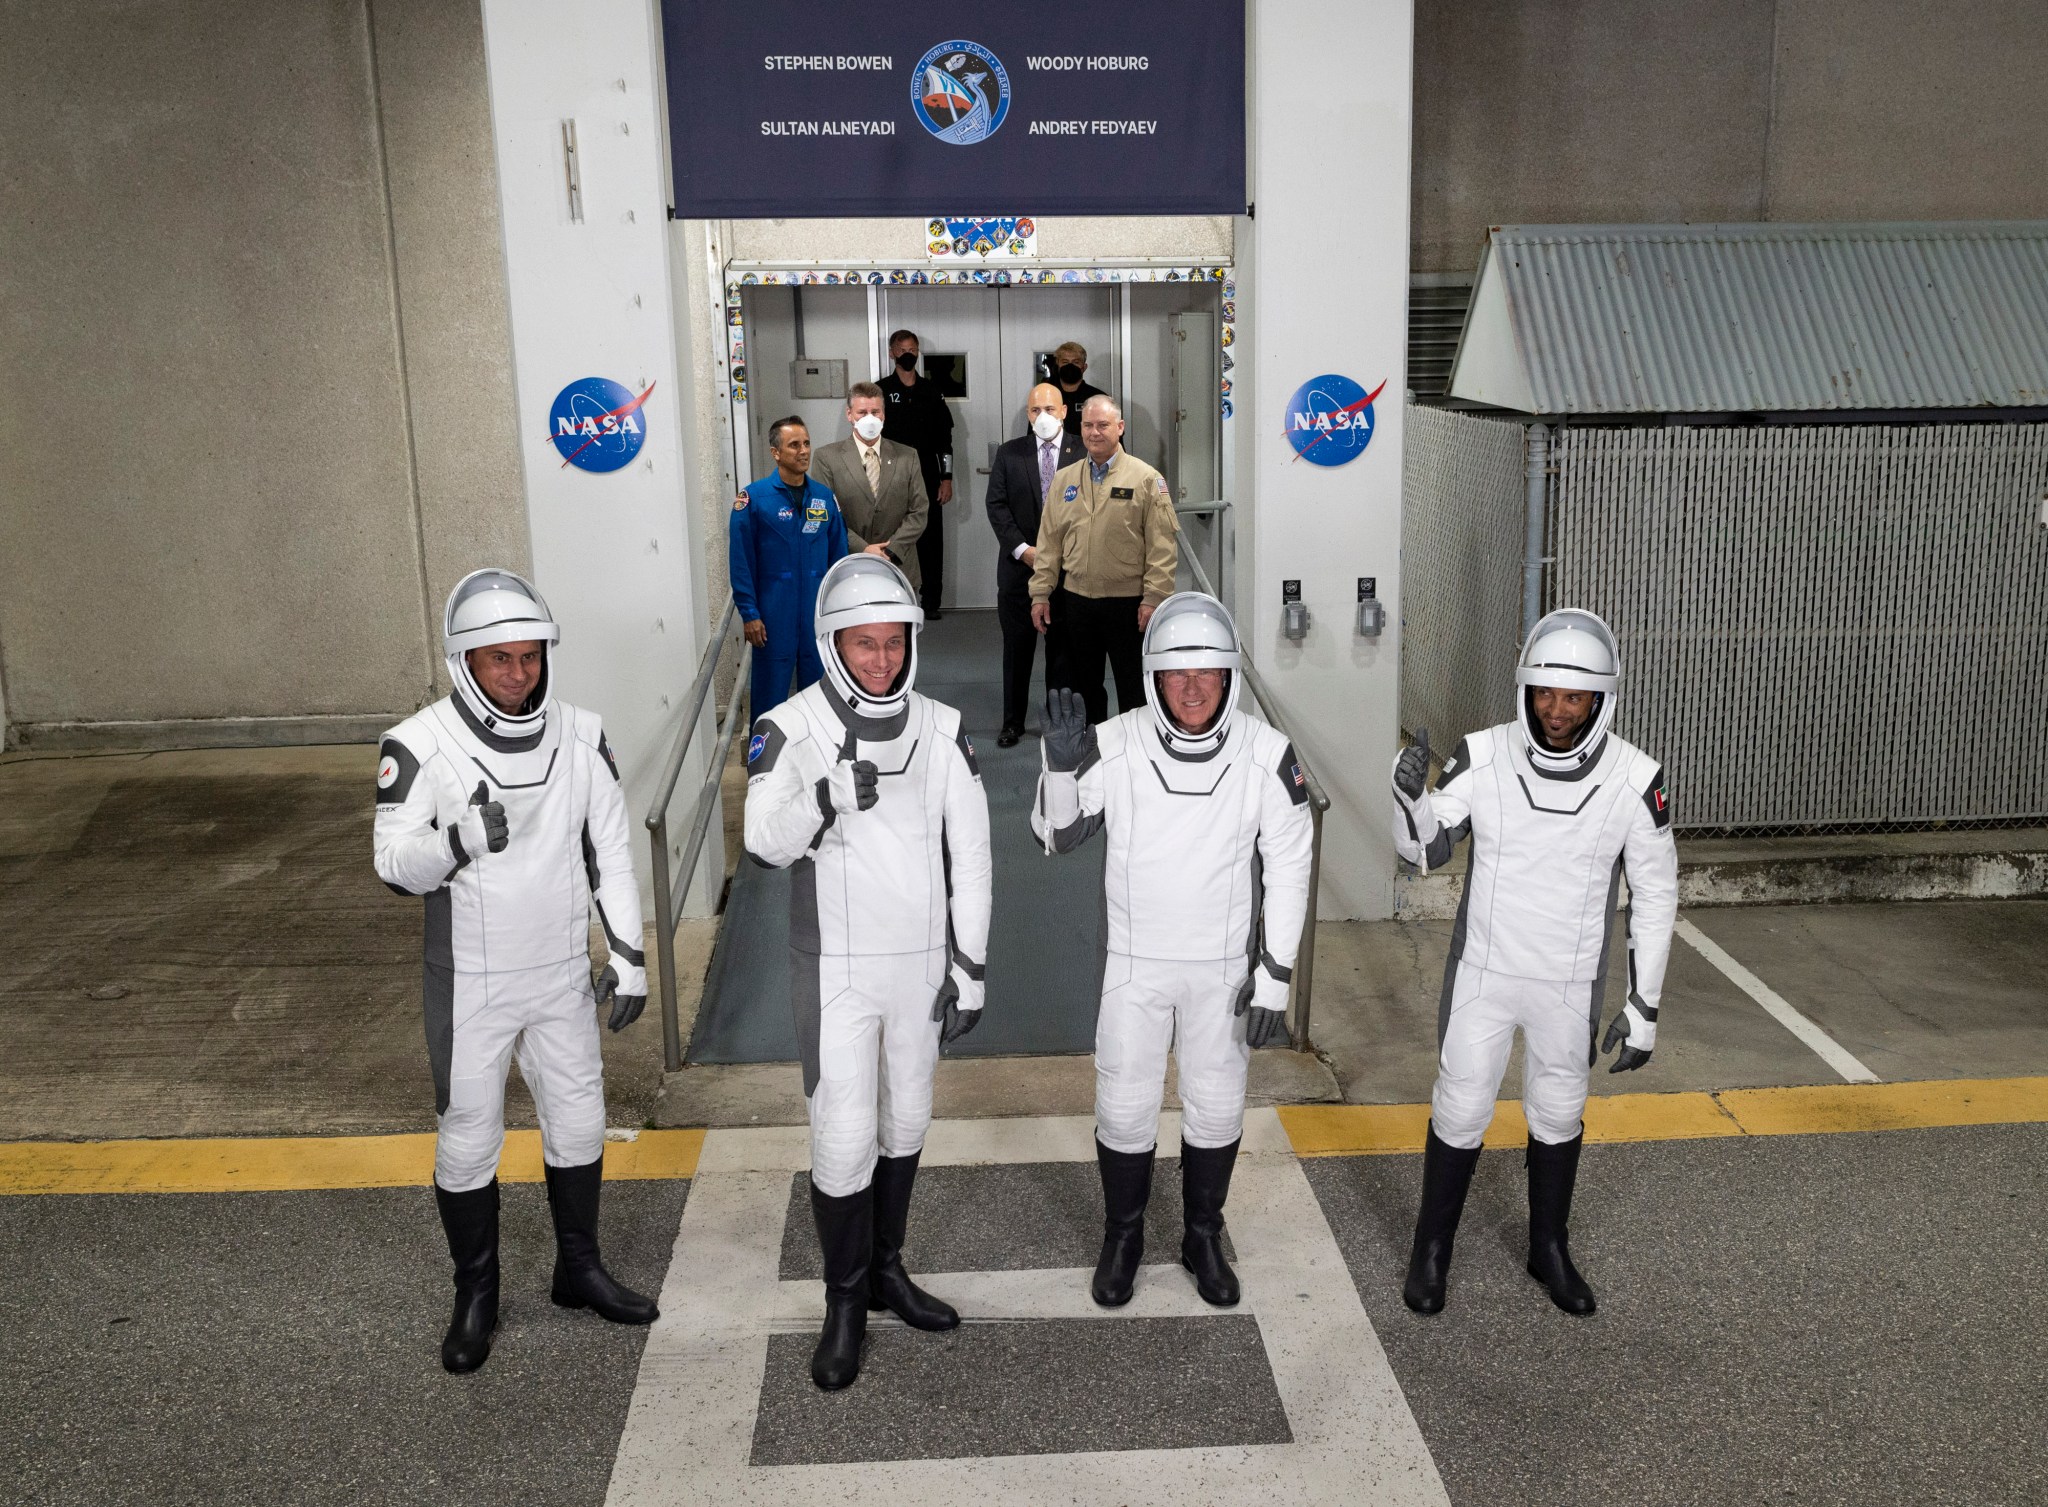 Roscosmos cosmonaut Andrey Fedyaev, left,NASA astronaut Warren “Woodyu0022 Hoburg, second from left, NASA astronaut Stephen Bowen, second from right, and UAE (United Arab Emirates) astronaut Sultan Alneyadi, right, wearing SpaceX spacesuits, pose as they prepare to depart the Neil A. Armstrong Operations and Checkout Building for Launch Complex 39A at NASA’s Kennedy Space Center in Florida.